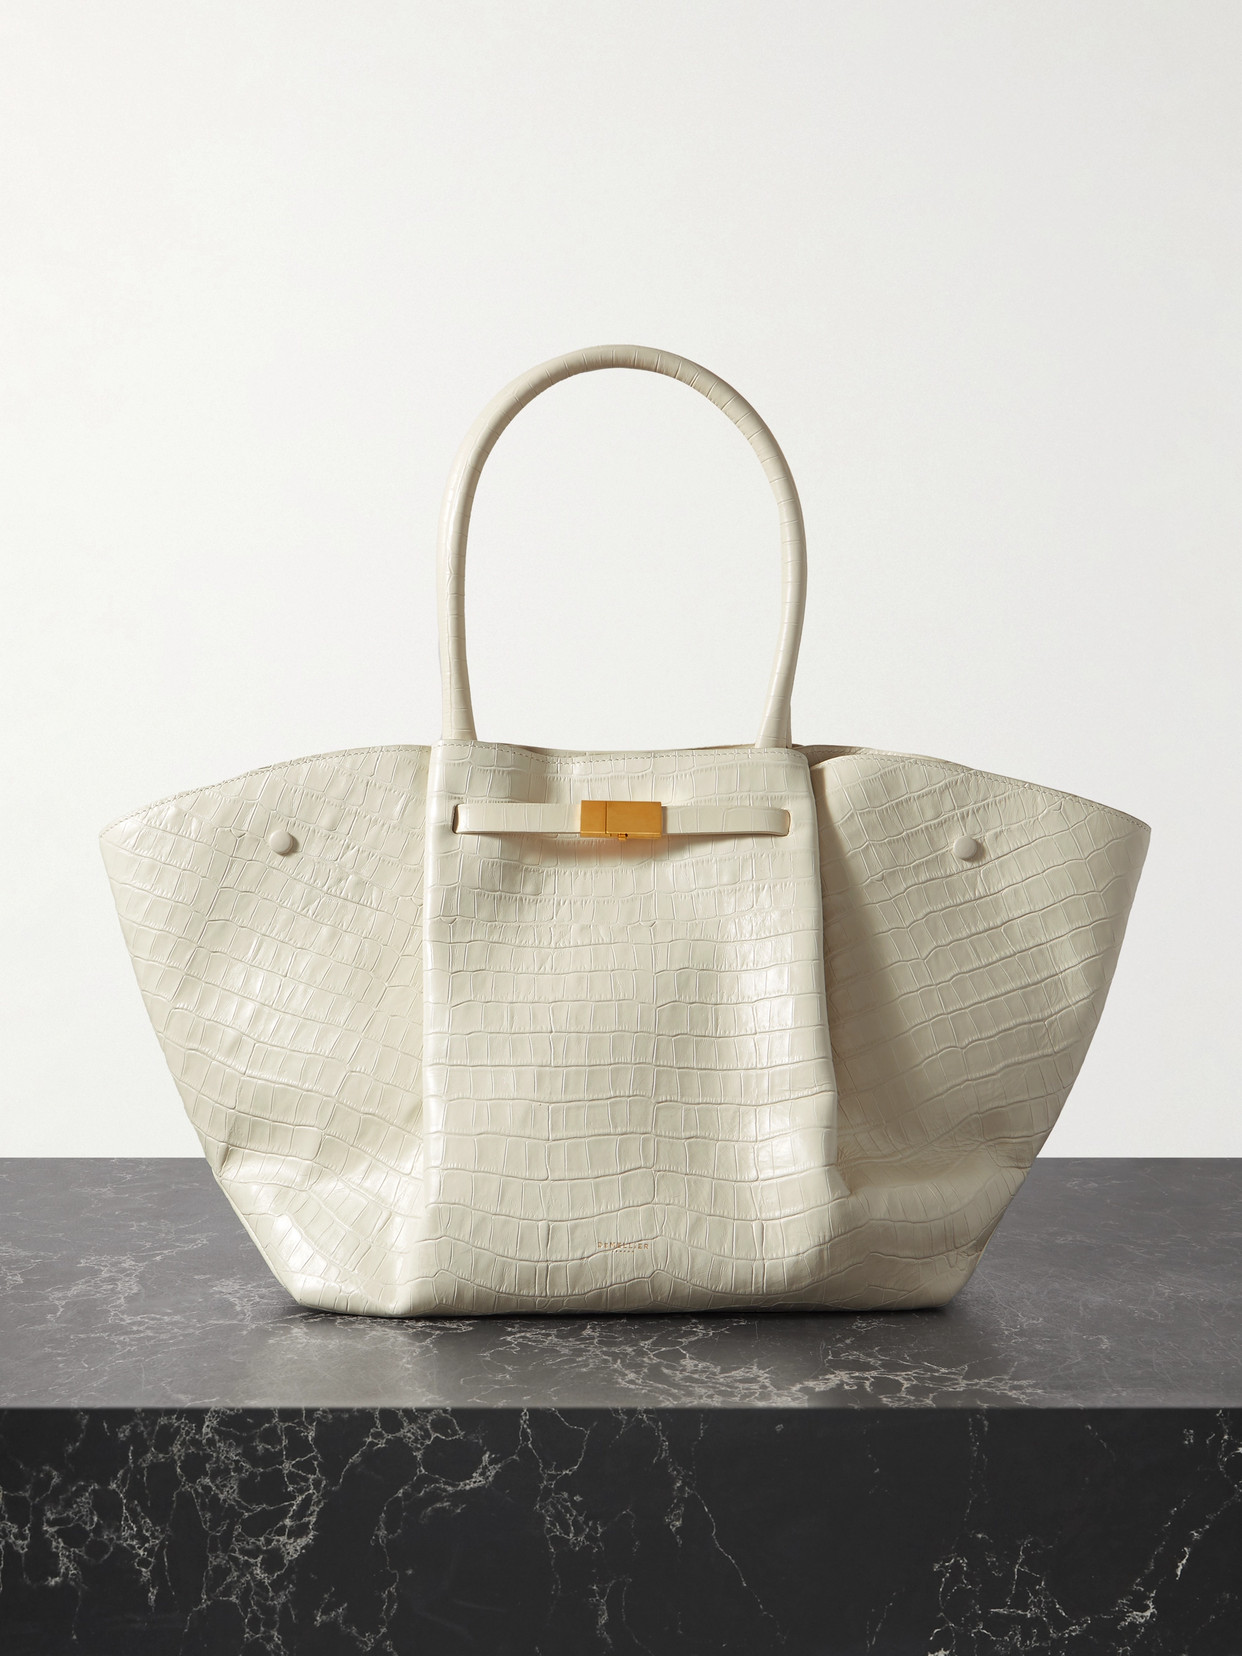 + Net Sustain New York Croc-Effect Leather Tote